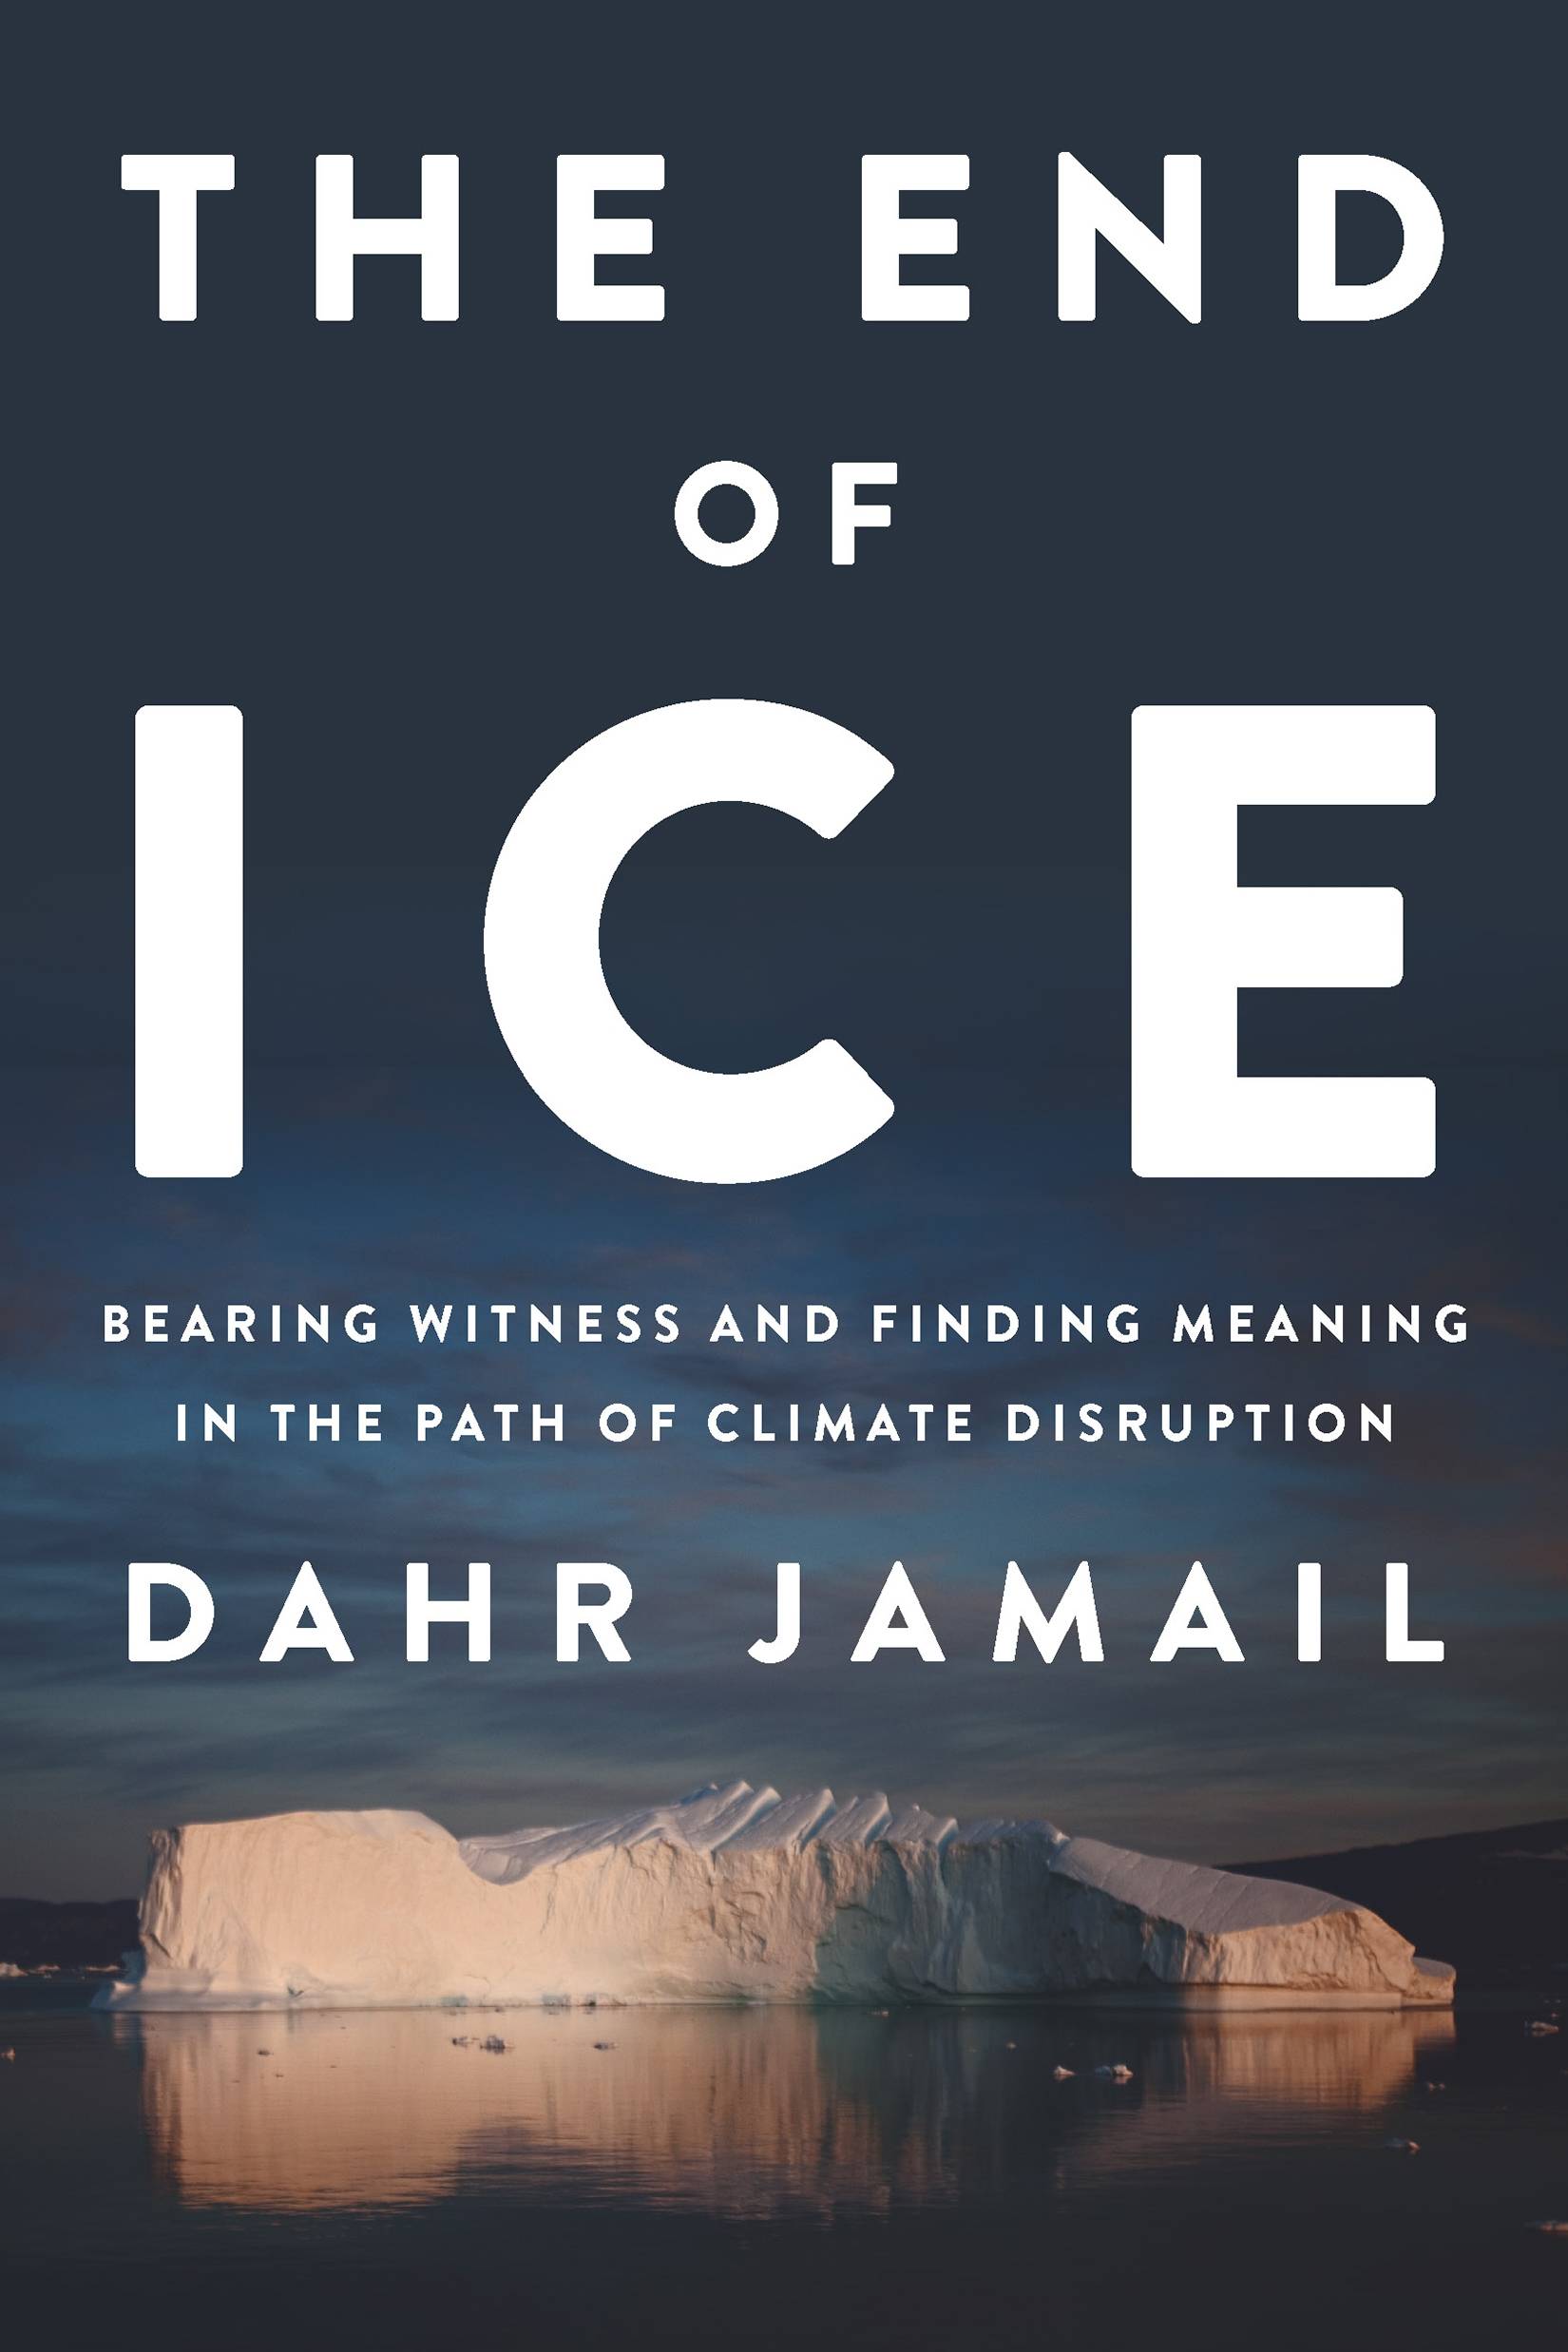 Author Talk by Dahr Jamail, “The End of Ice”